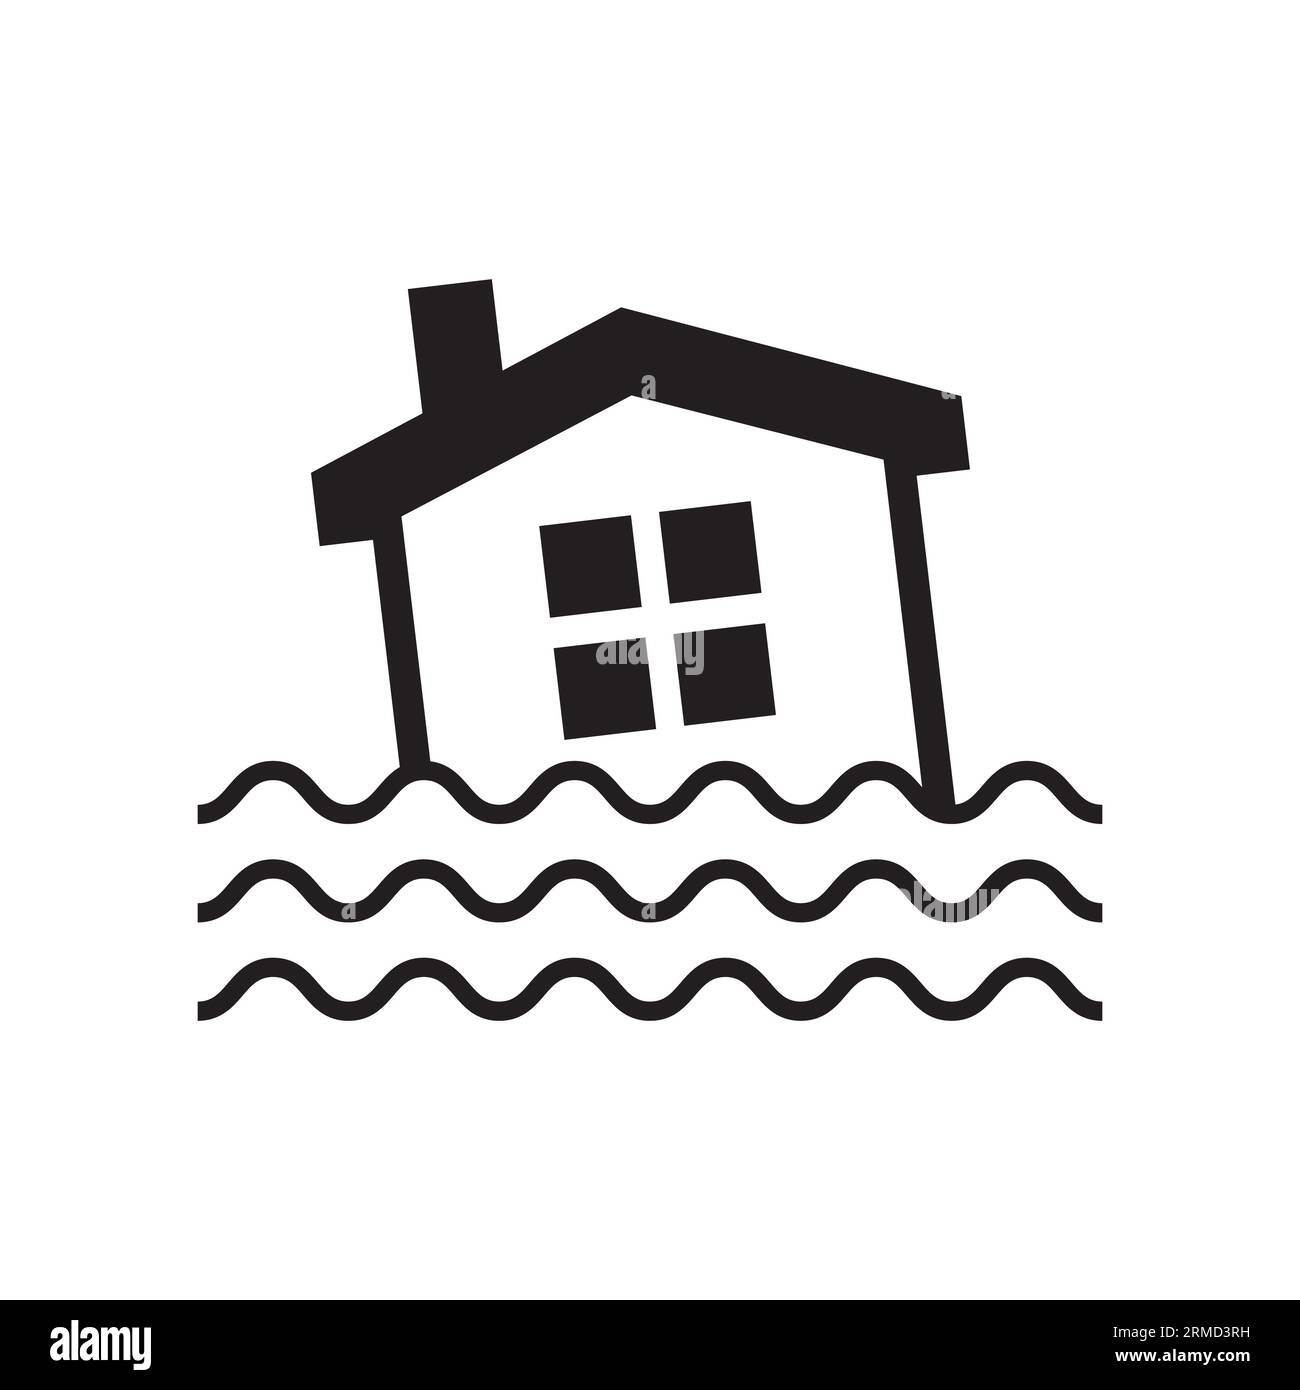 Flooded home vector icon in black solid flat design icon isolated on white background Stock Vector